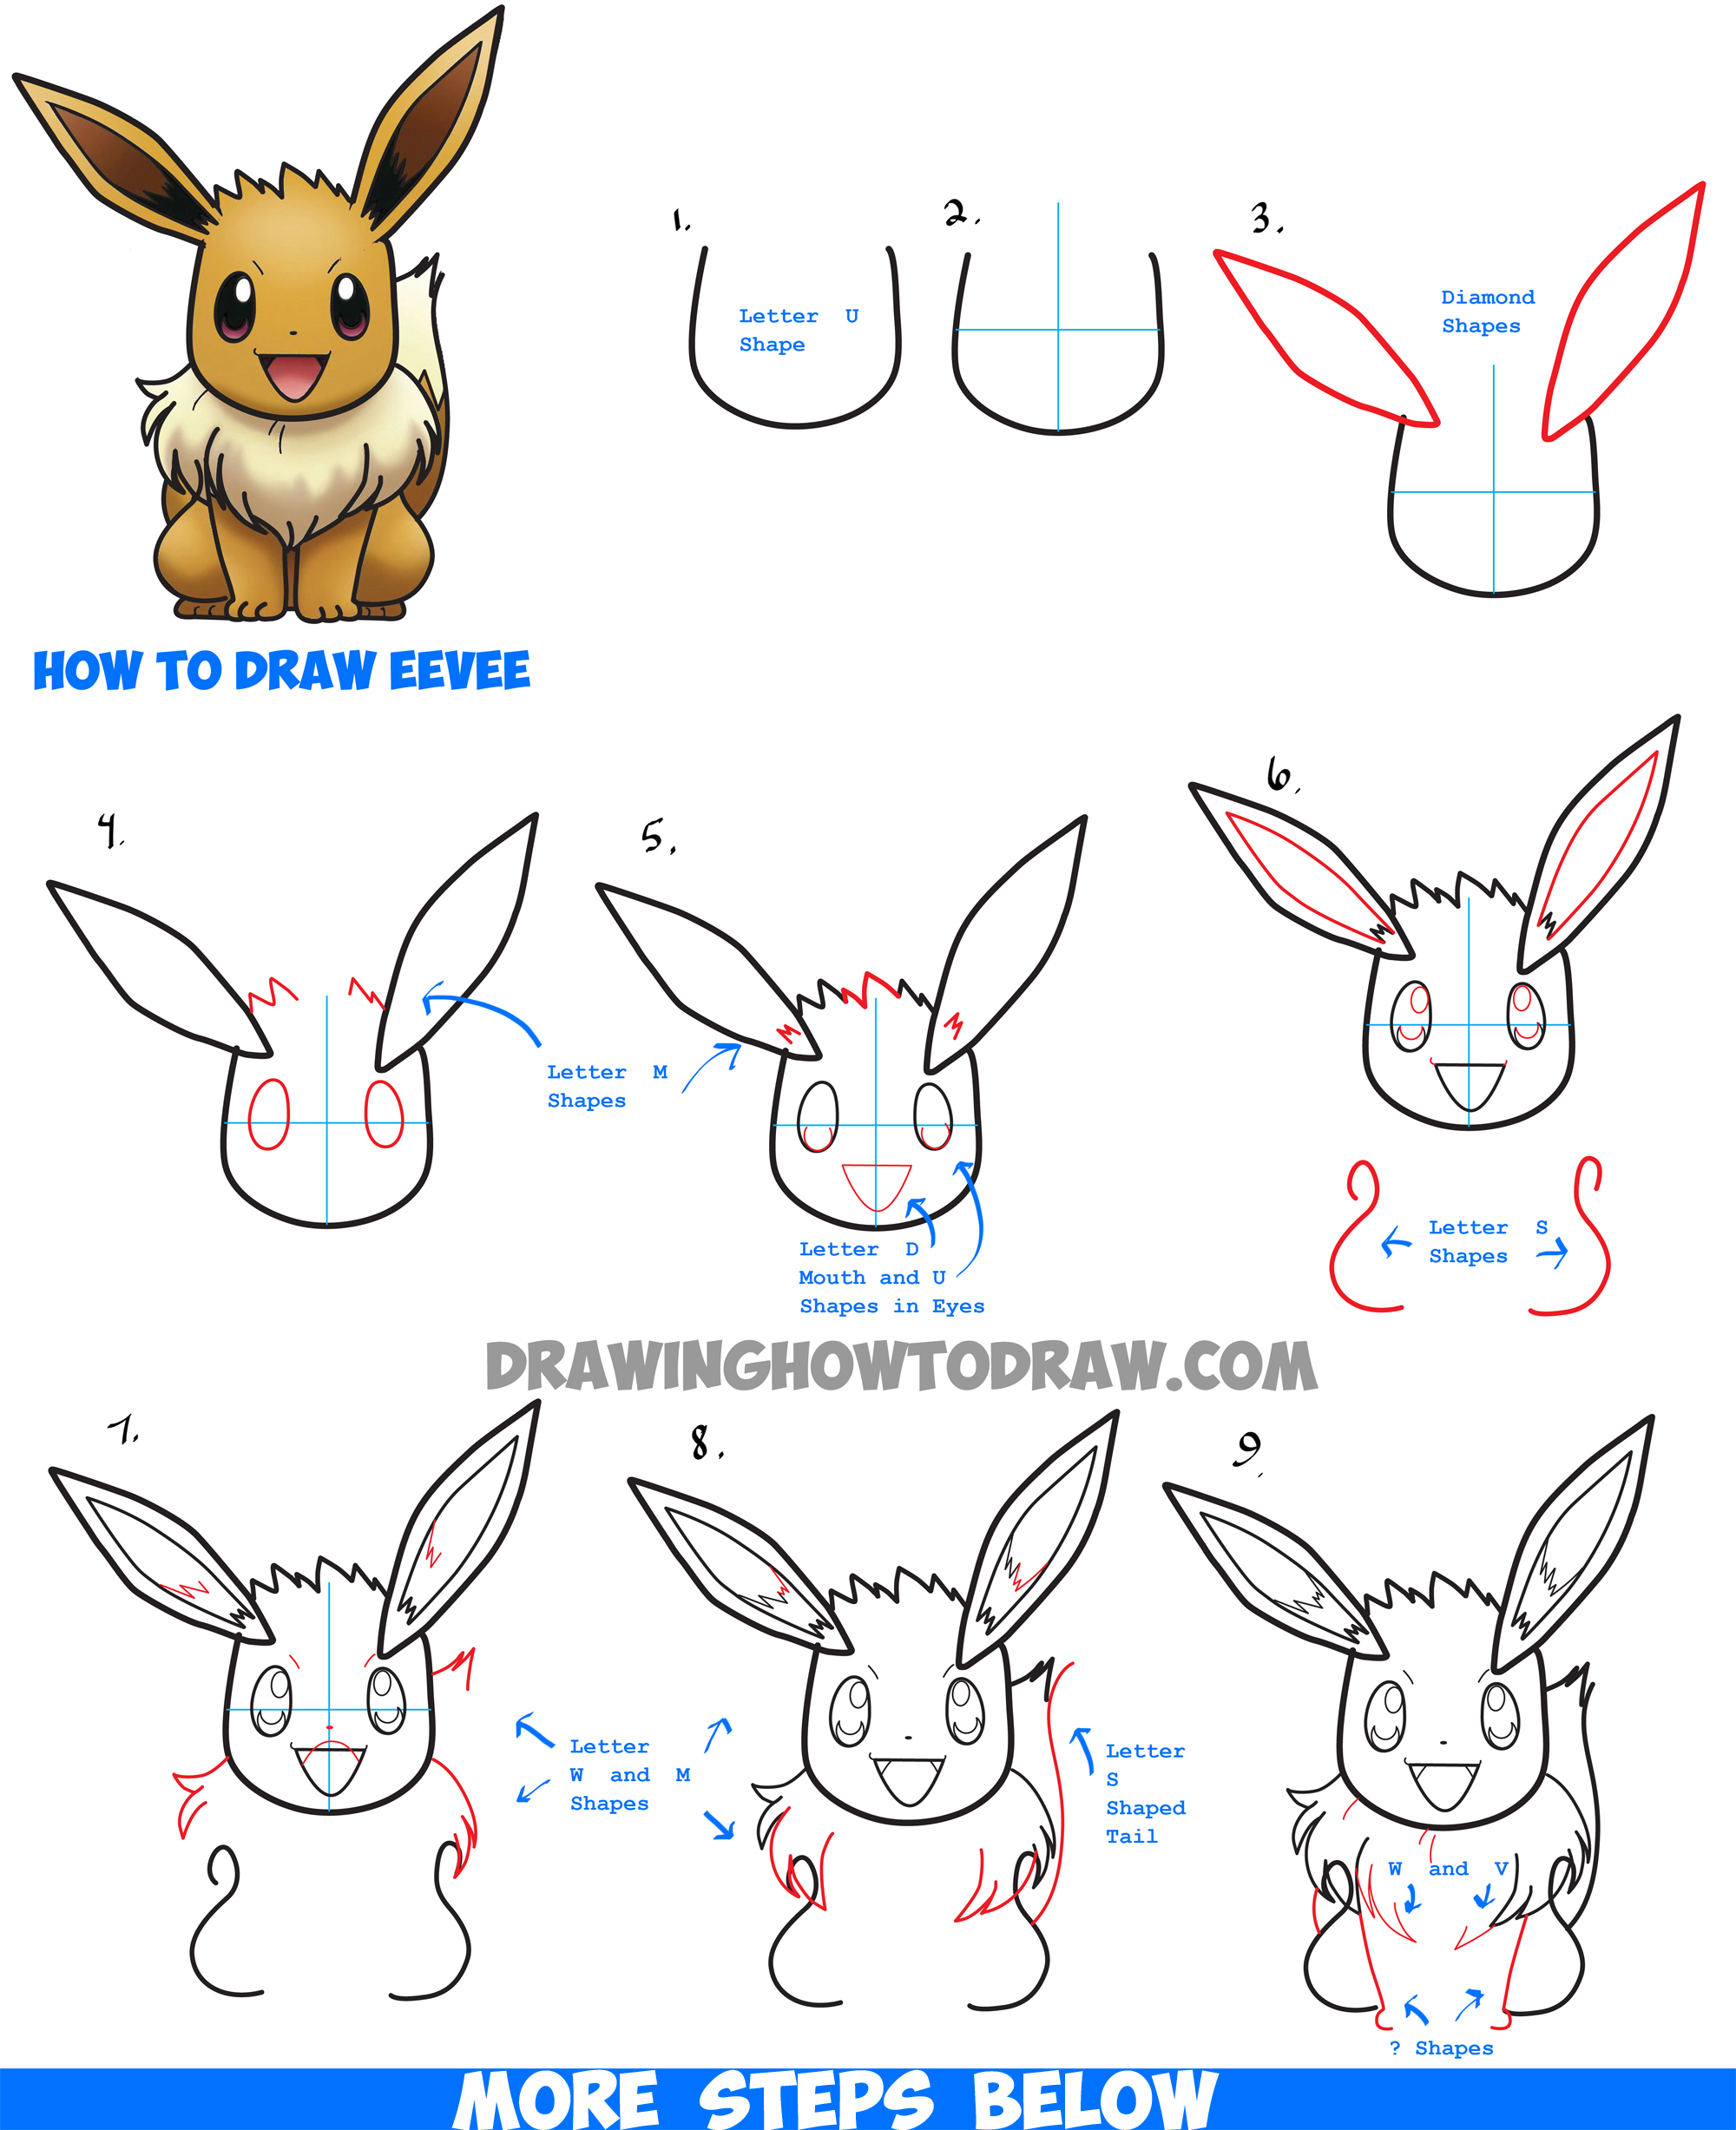 How to Draw Eevee from Pokemon with Easy Step by Step Drawing Tutorial ...